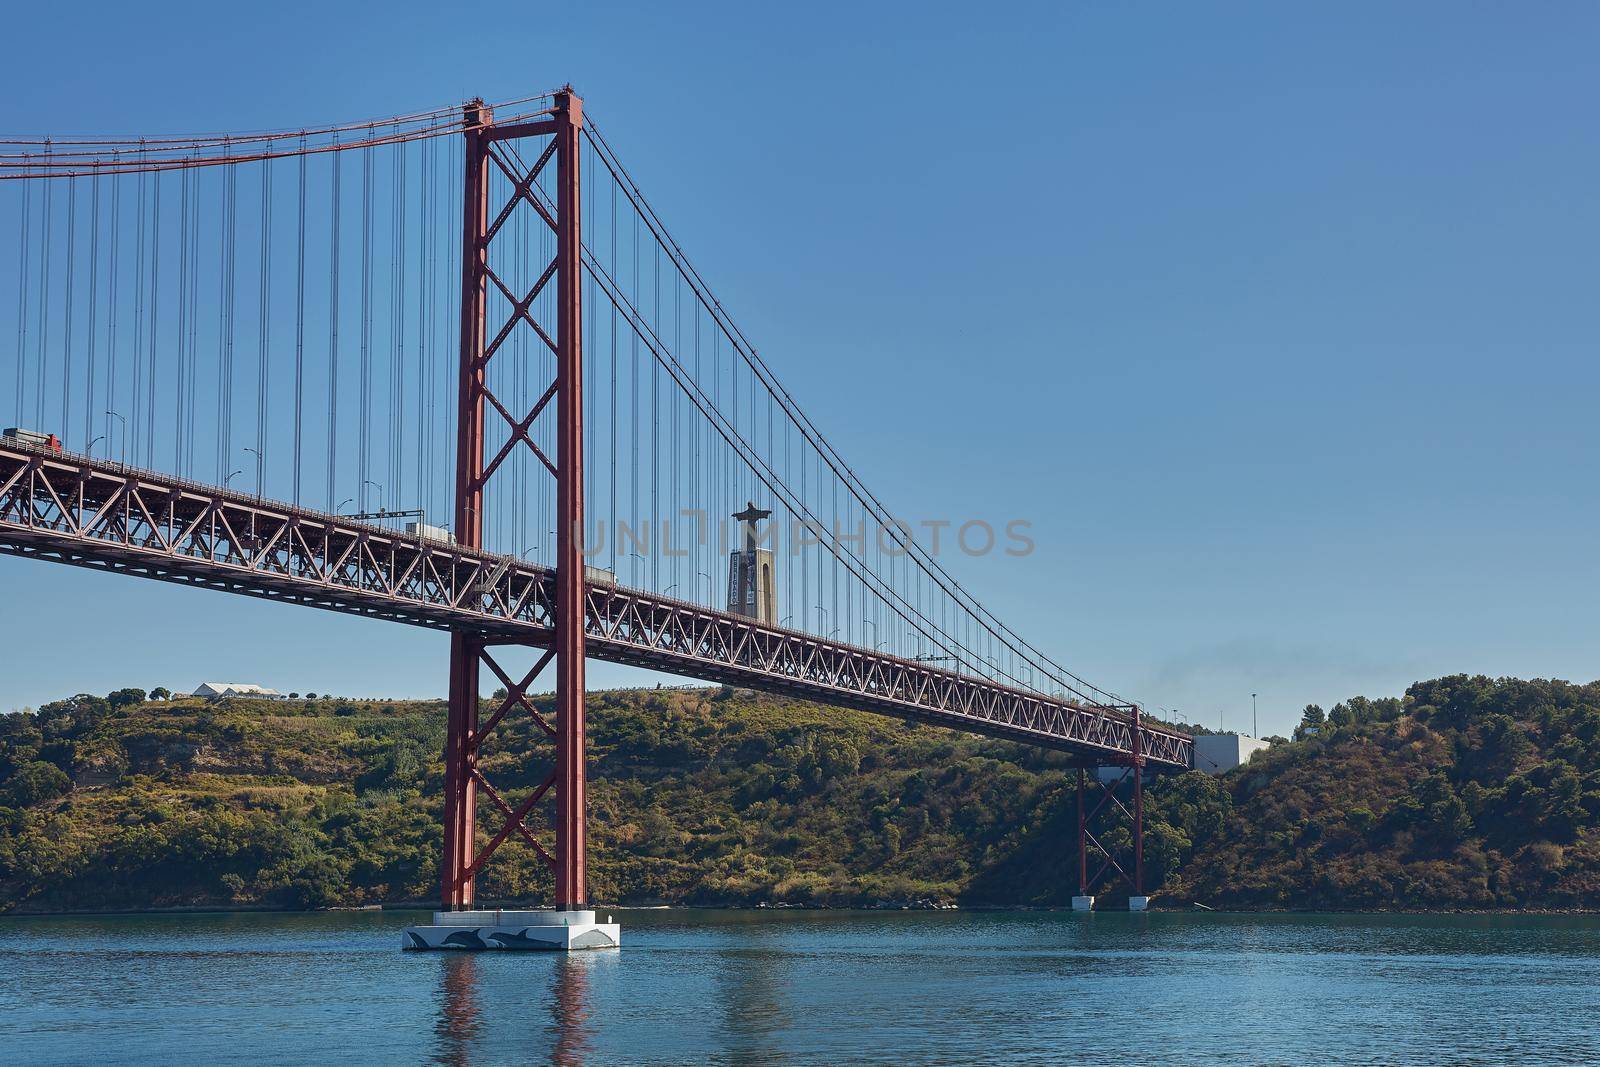 The 25 April bridge (Ponte 25 de Abril) is a steel suspension bridge located in Lisbon, Portugal, crossing the Tagus river. It is one of the most famous landmarks of the region by wondry